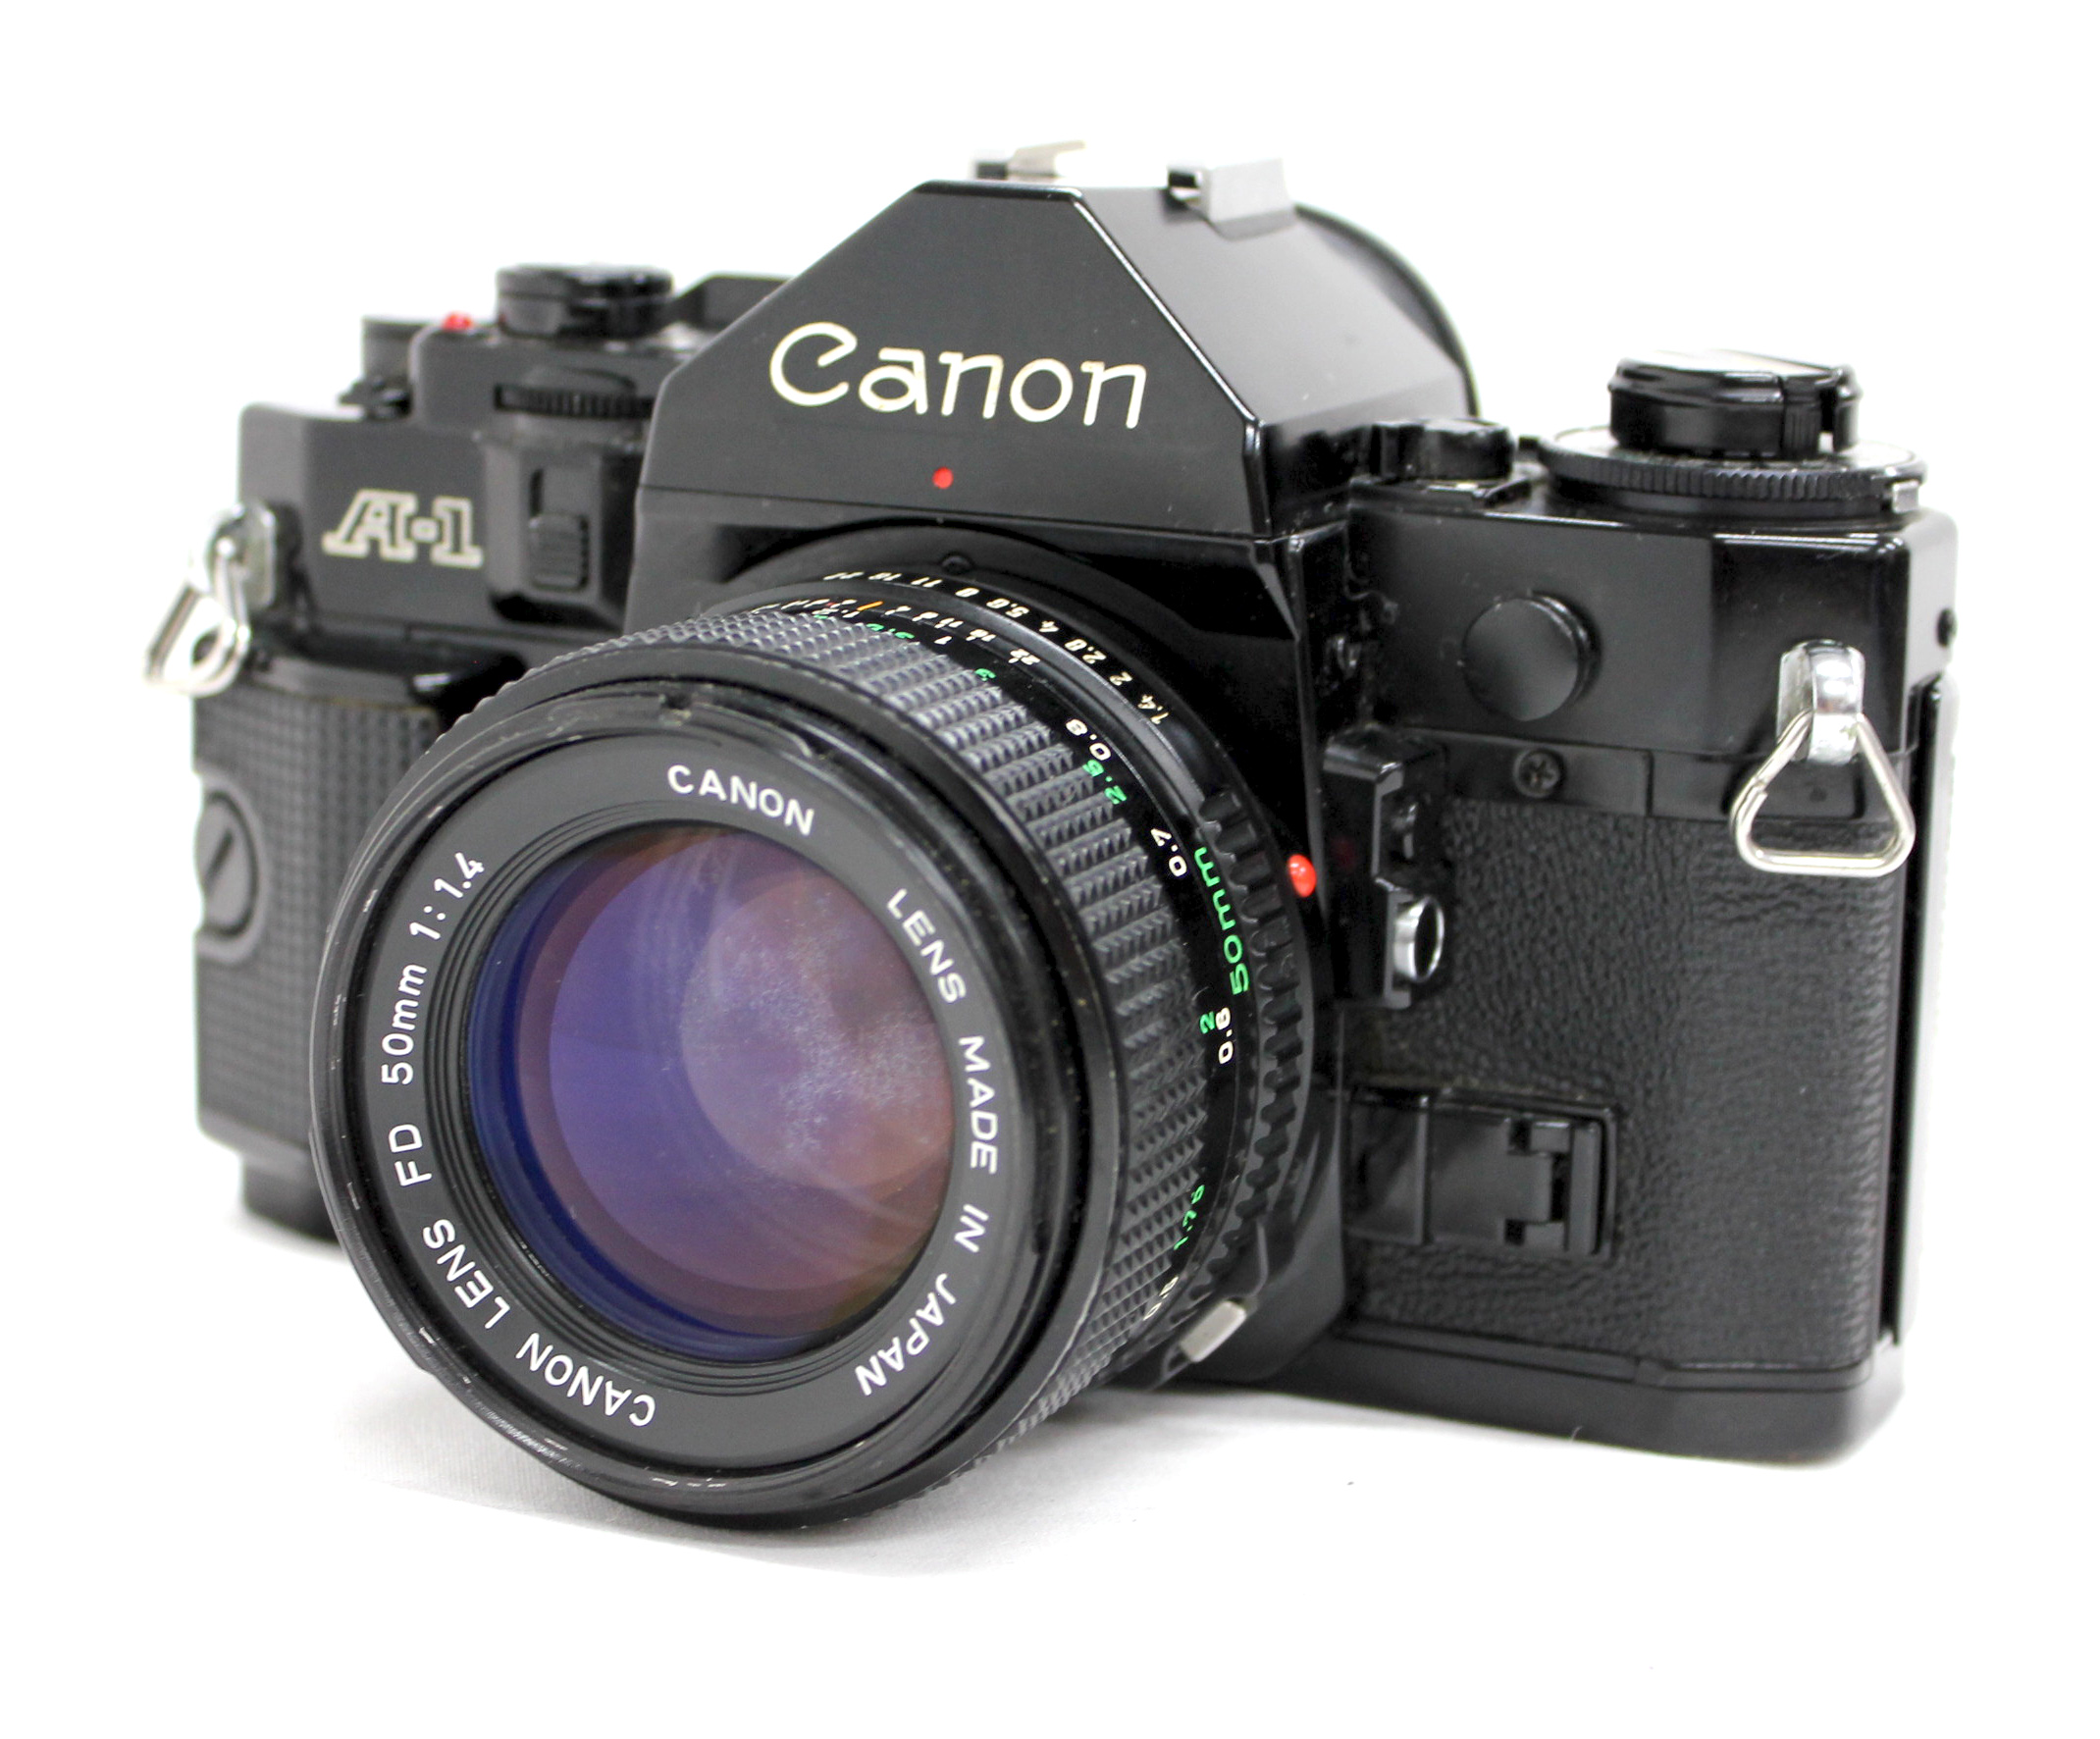 Japan Used Camera Shop | [Excellent++] Canon A-1 35mm SLR Film Camera with Bonus Lens New FD 50mm F/1.4 from Japan